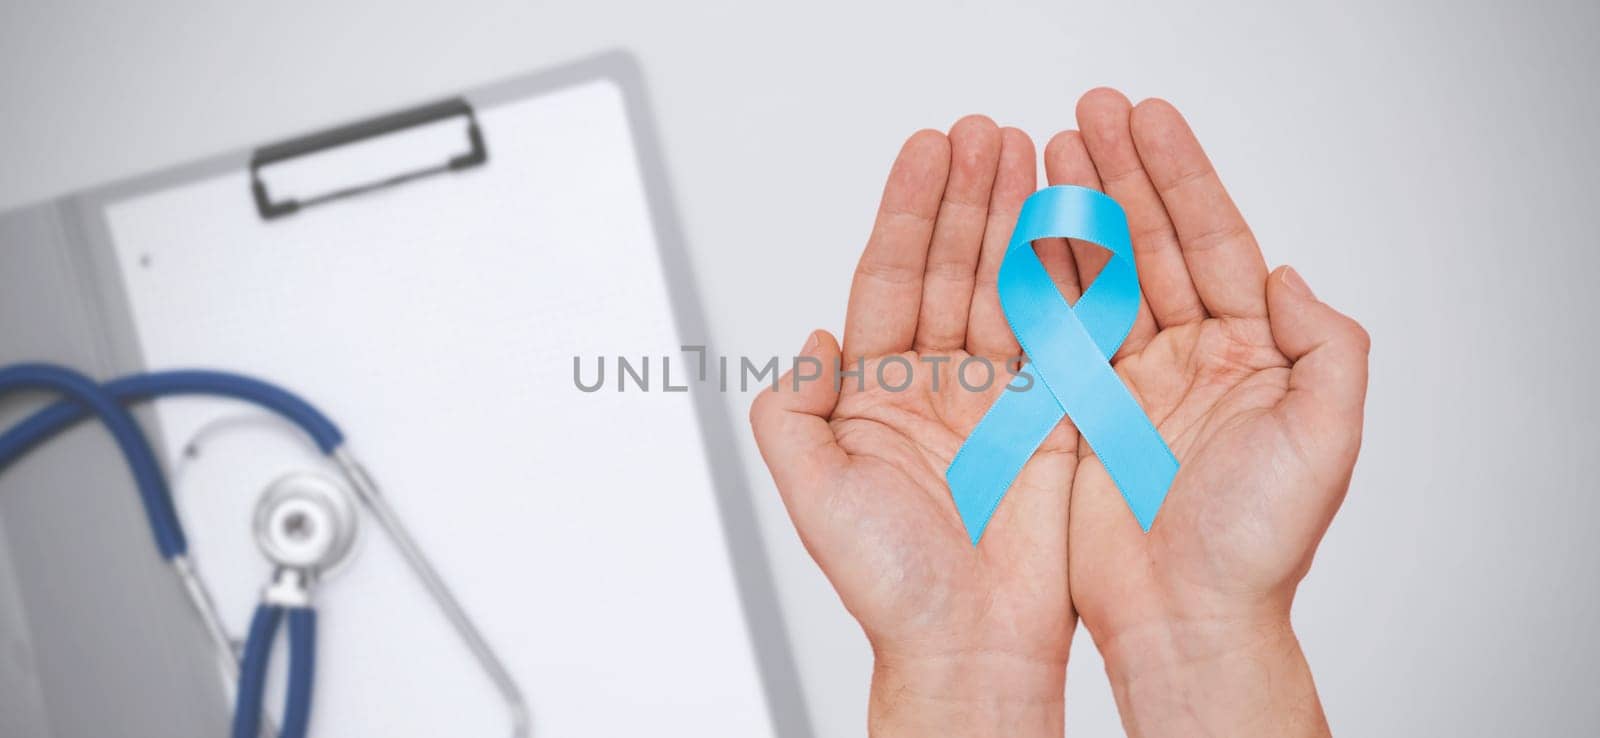 Hand holding blue prostate cancer awareness ribbon by simpson33